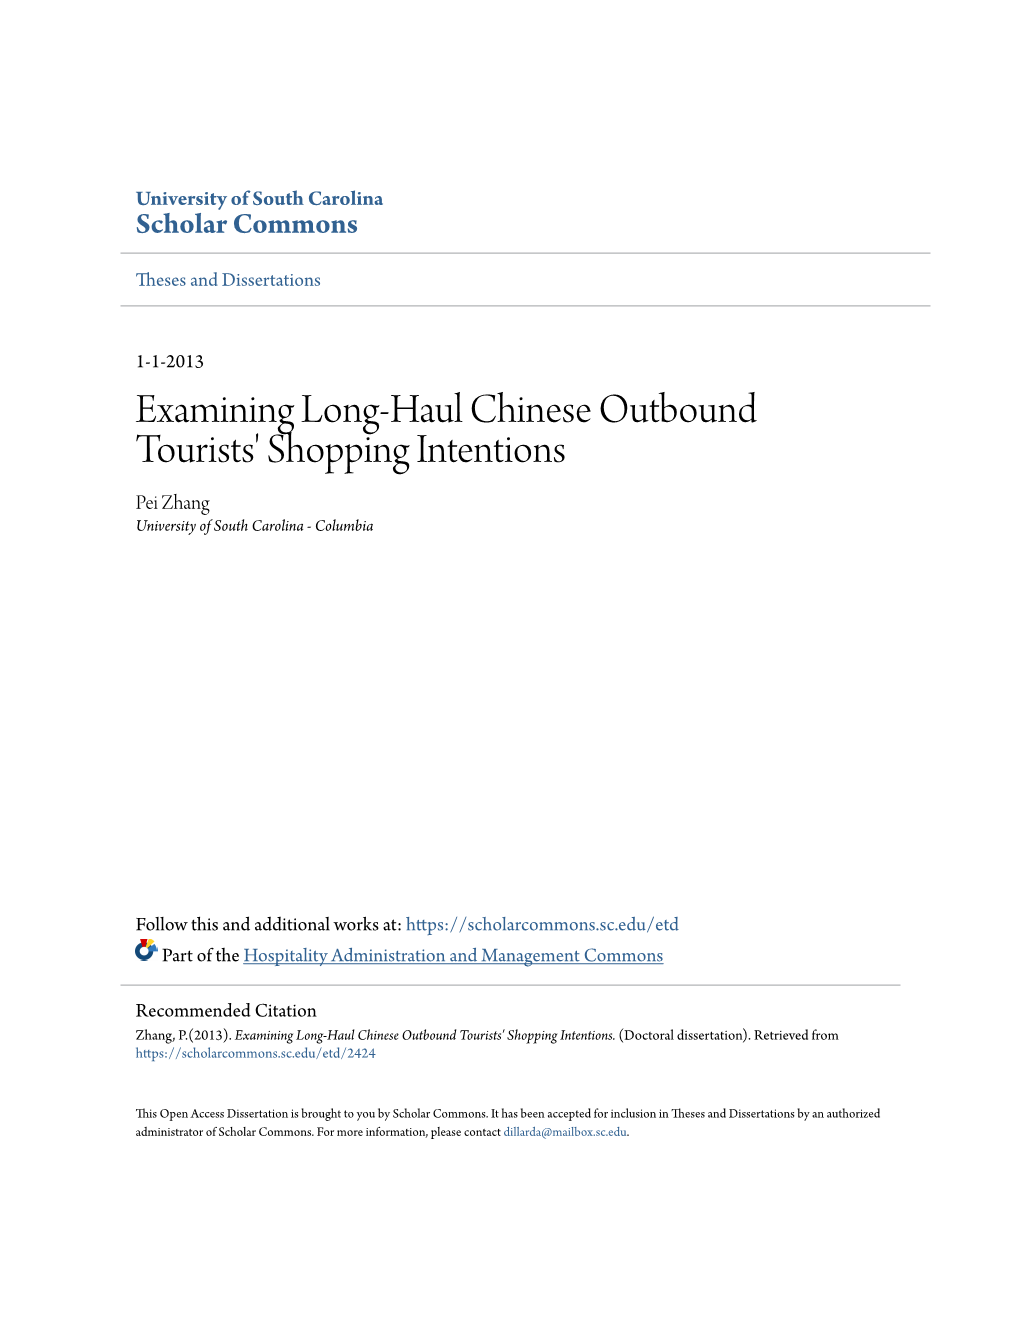 Examining Long-Haul Chinese Outbound Tourists' Shopping Intentions Pei Zhang University of South Carolina - Columbia